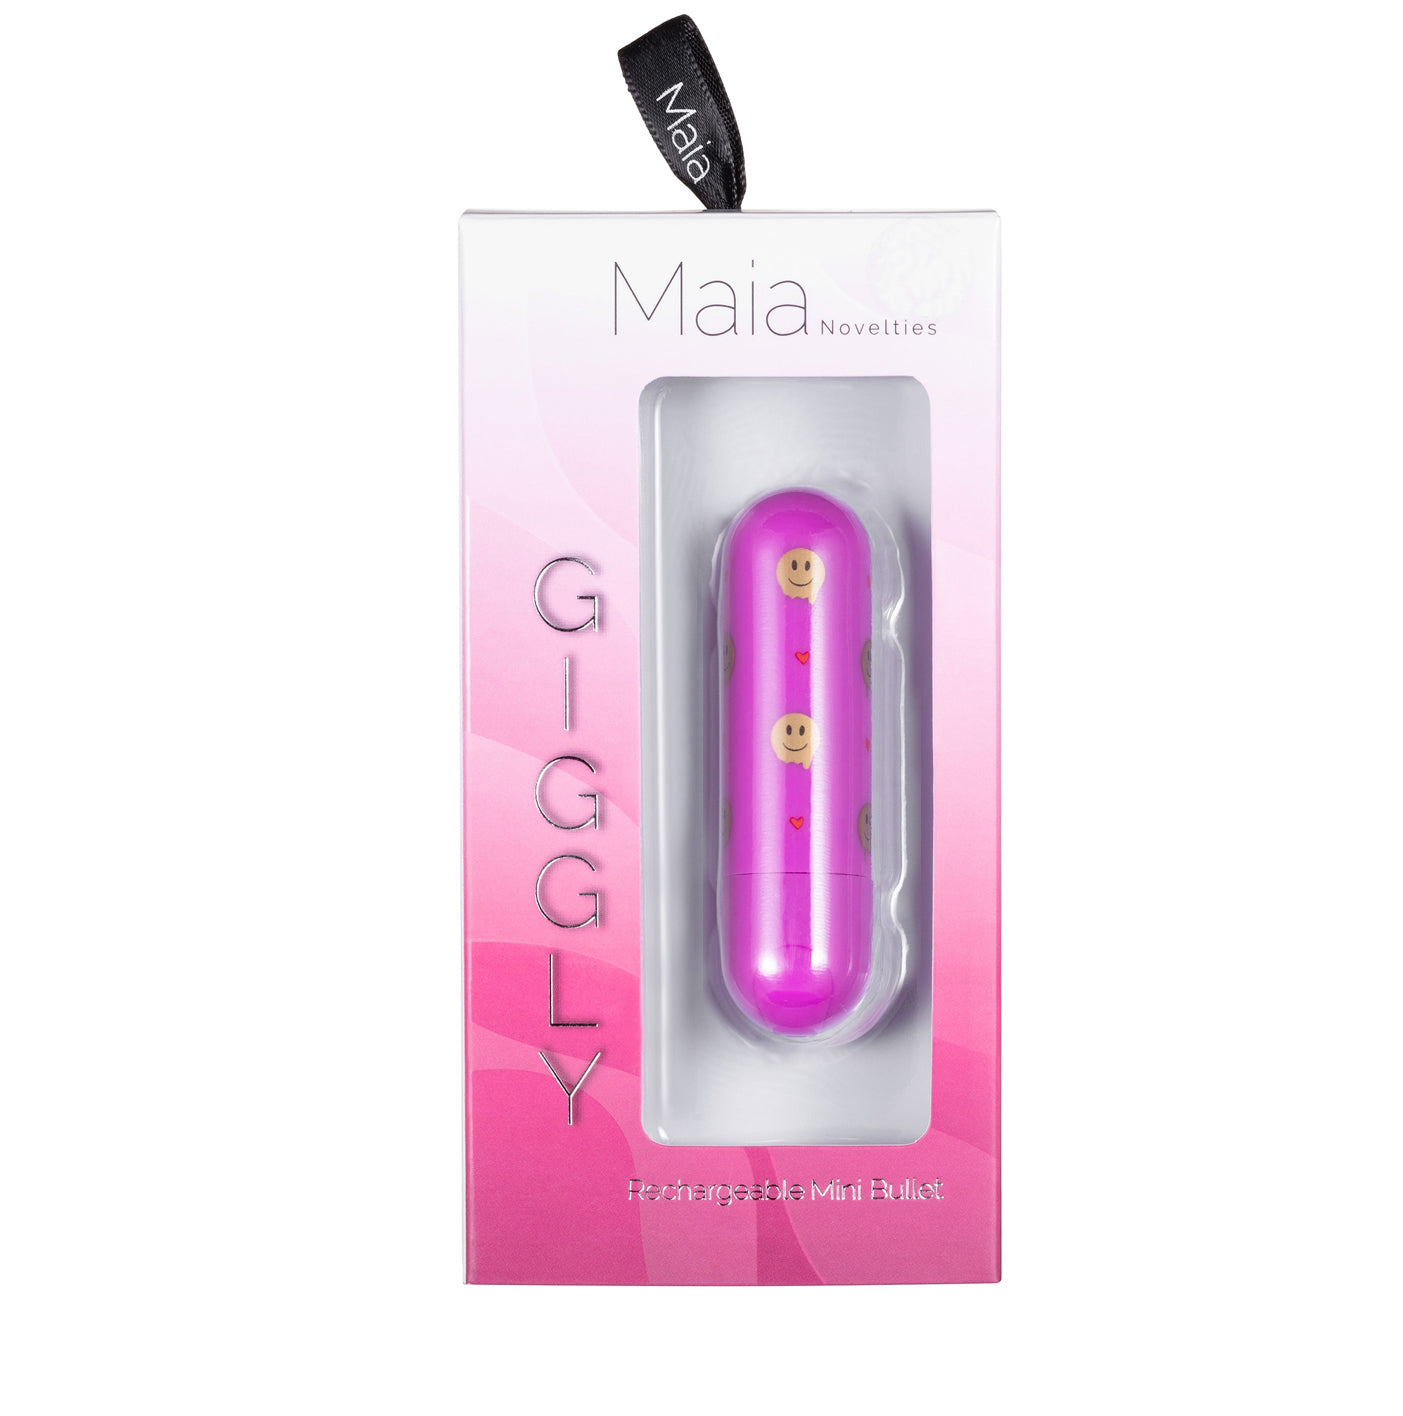 Giggly Super Charged Mini Bullet - Pink-1